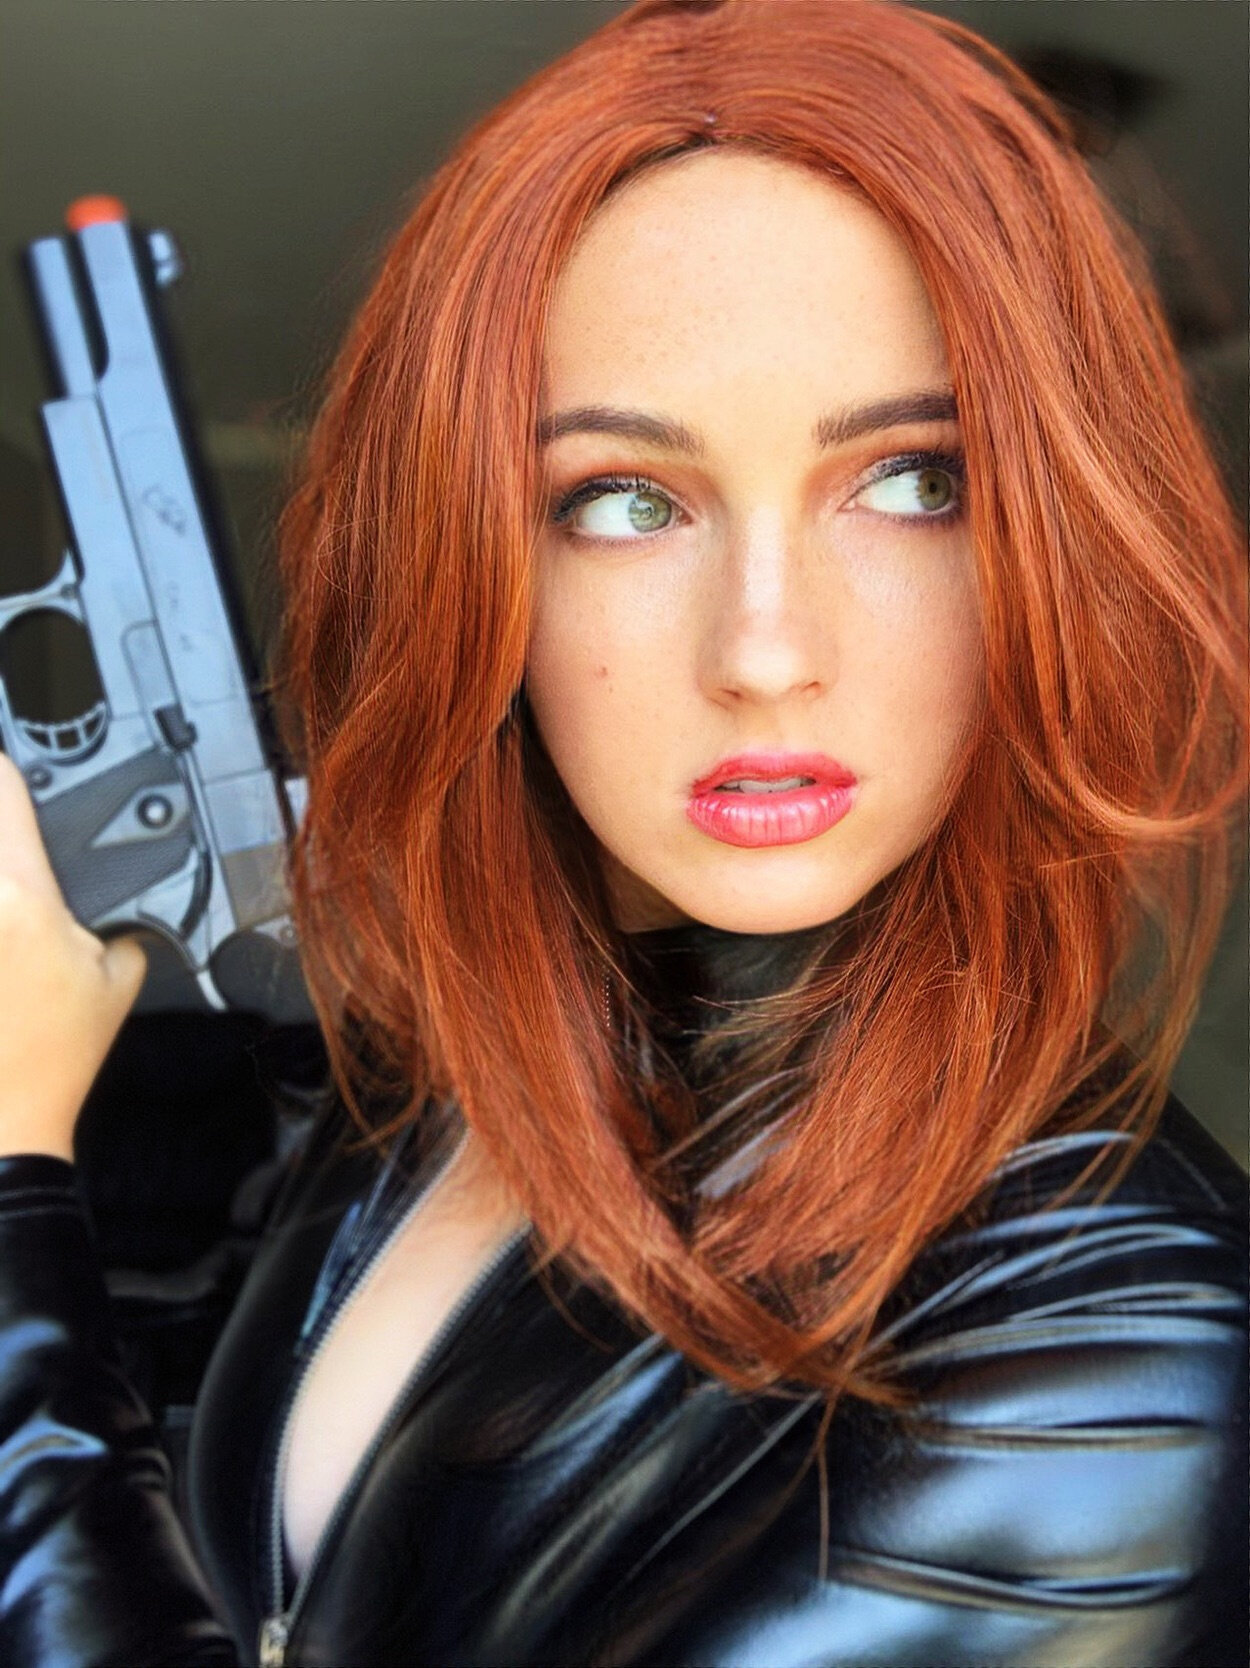 Black Widow from the Avengers